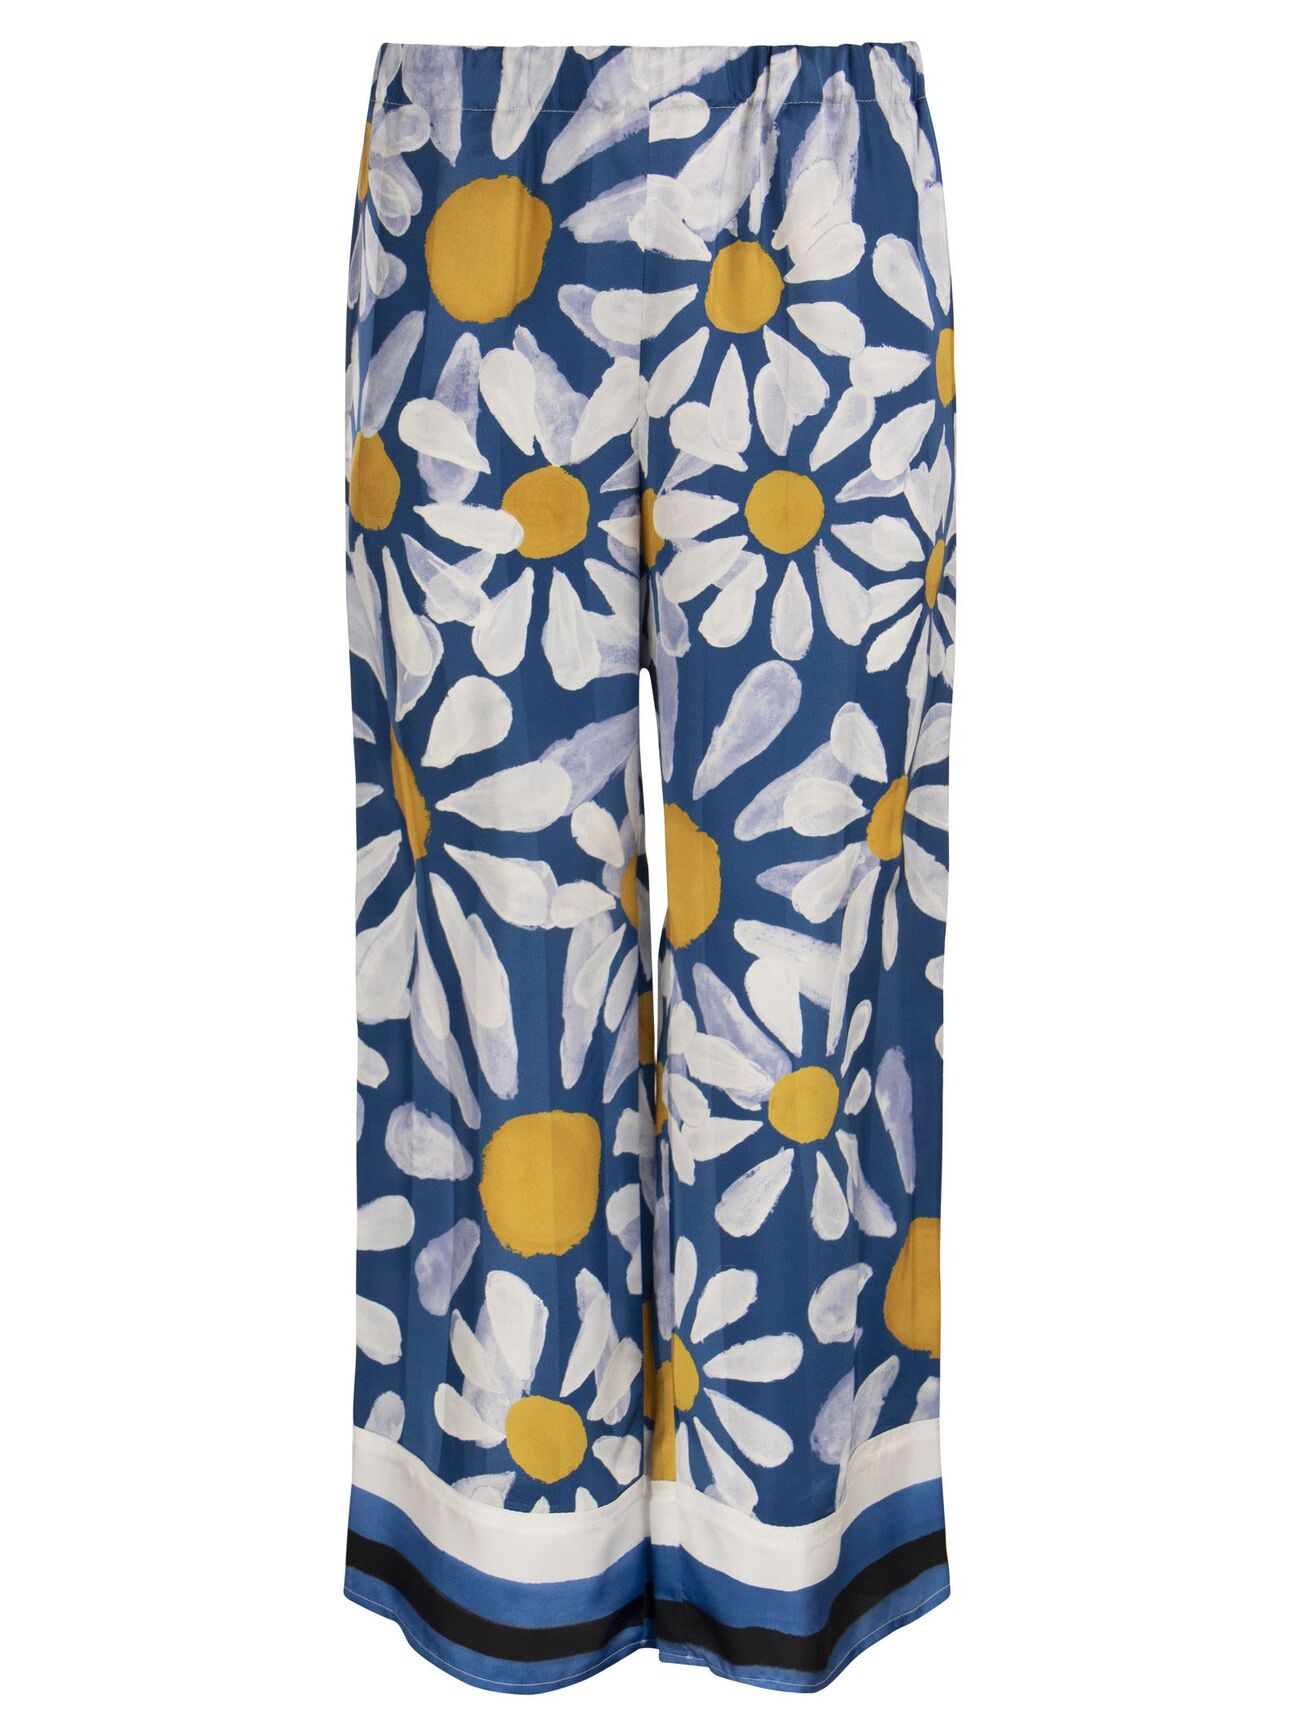 Marni Viscose Floral Print Trousers in blue